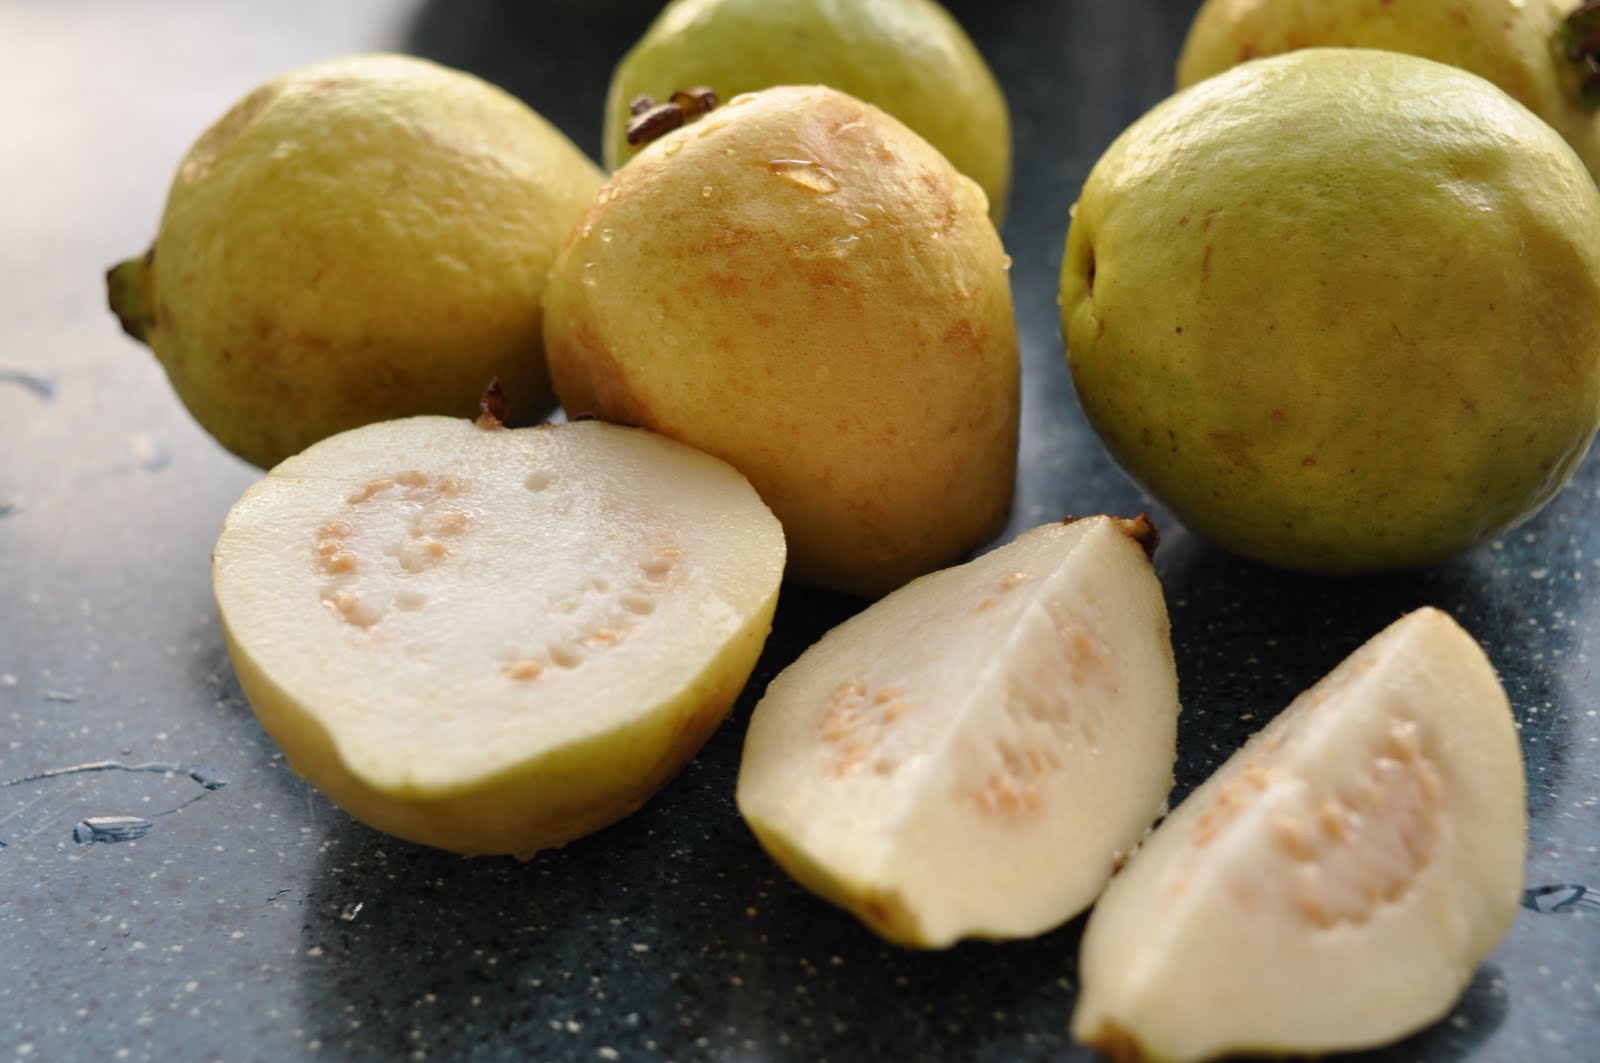 Apple vs Guava: Why Guava is a Healthy Superfood